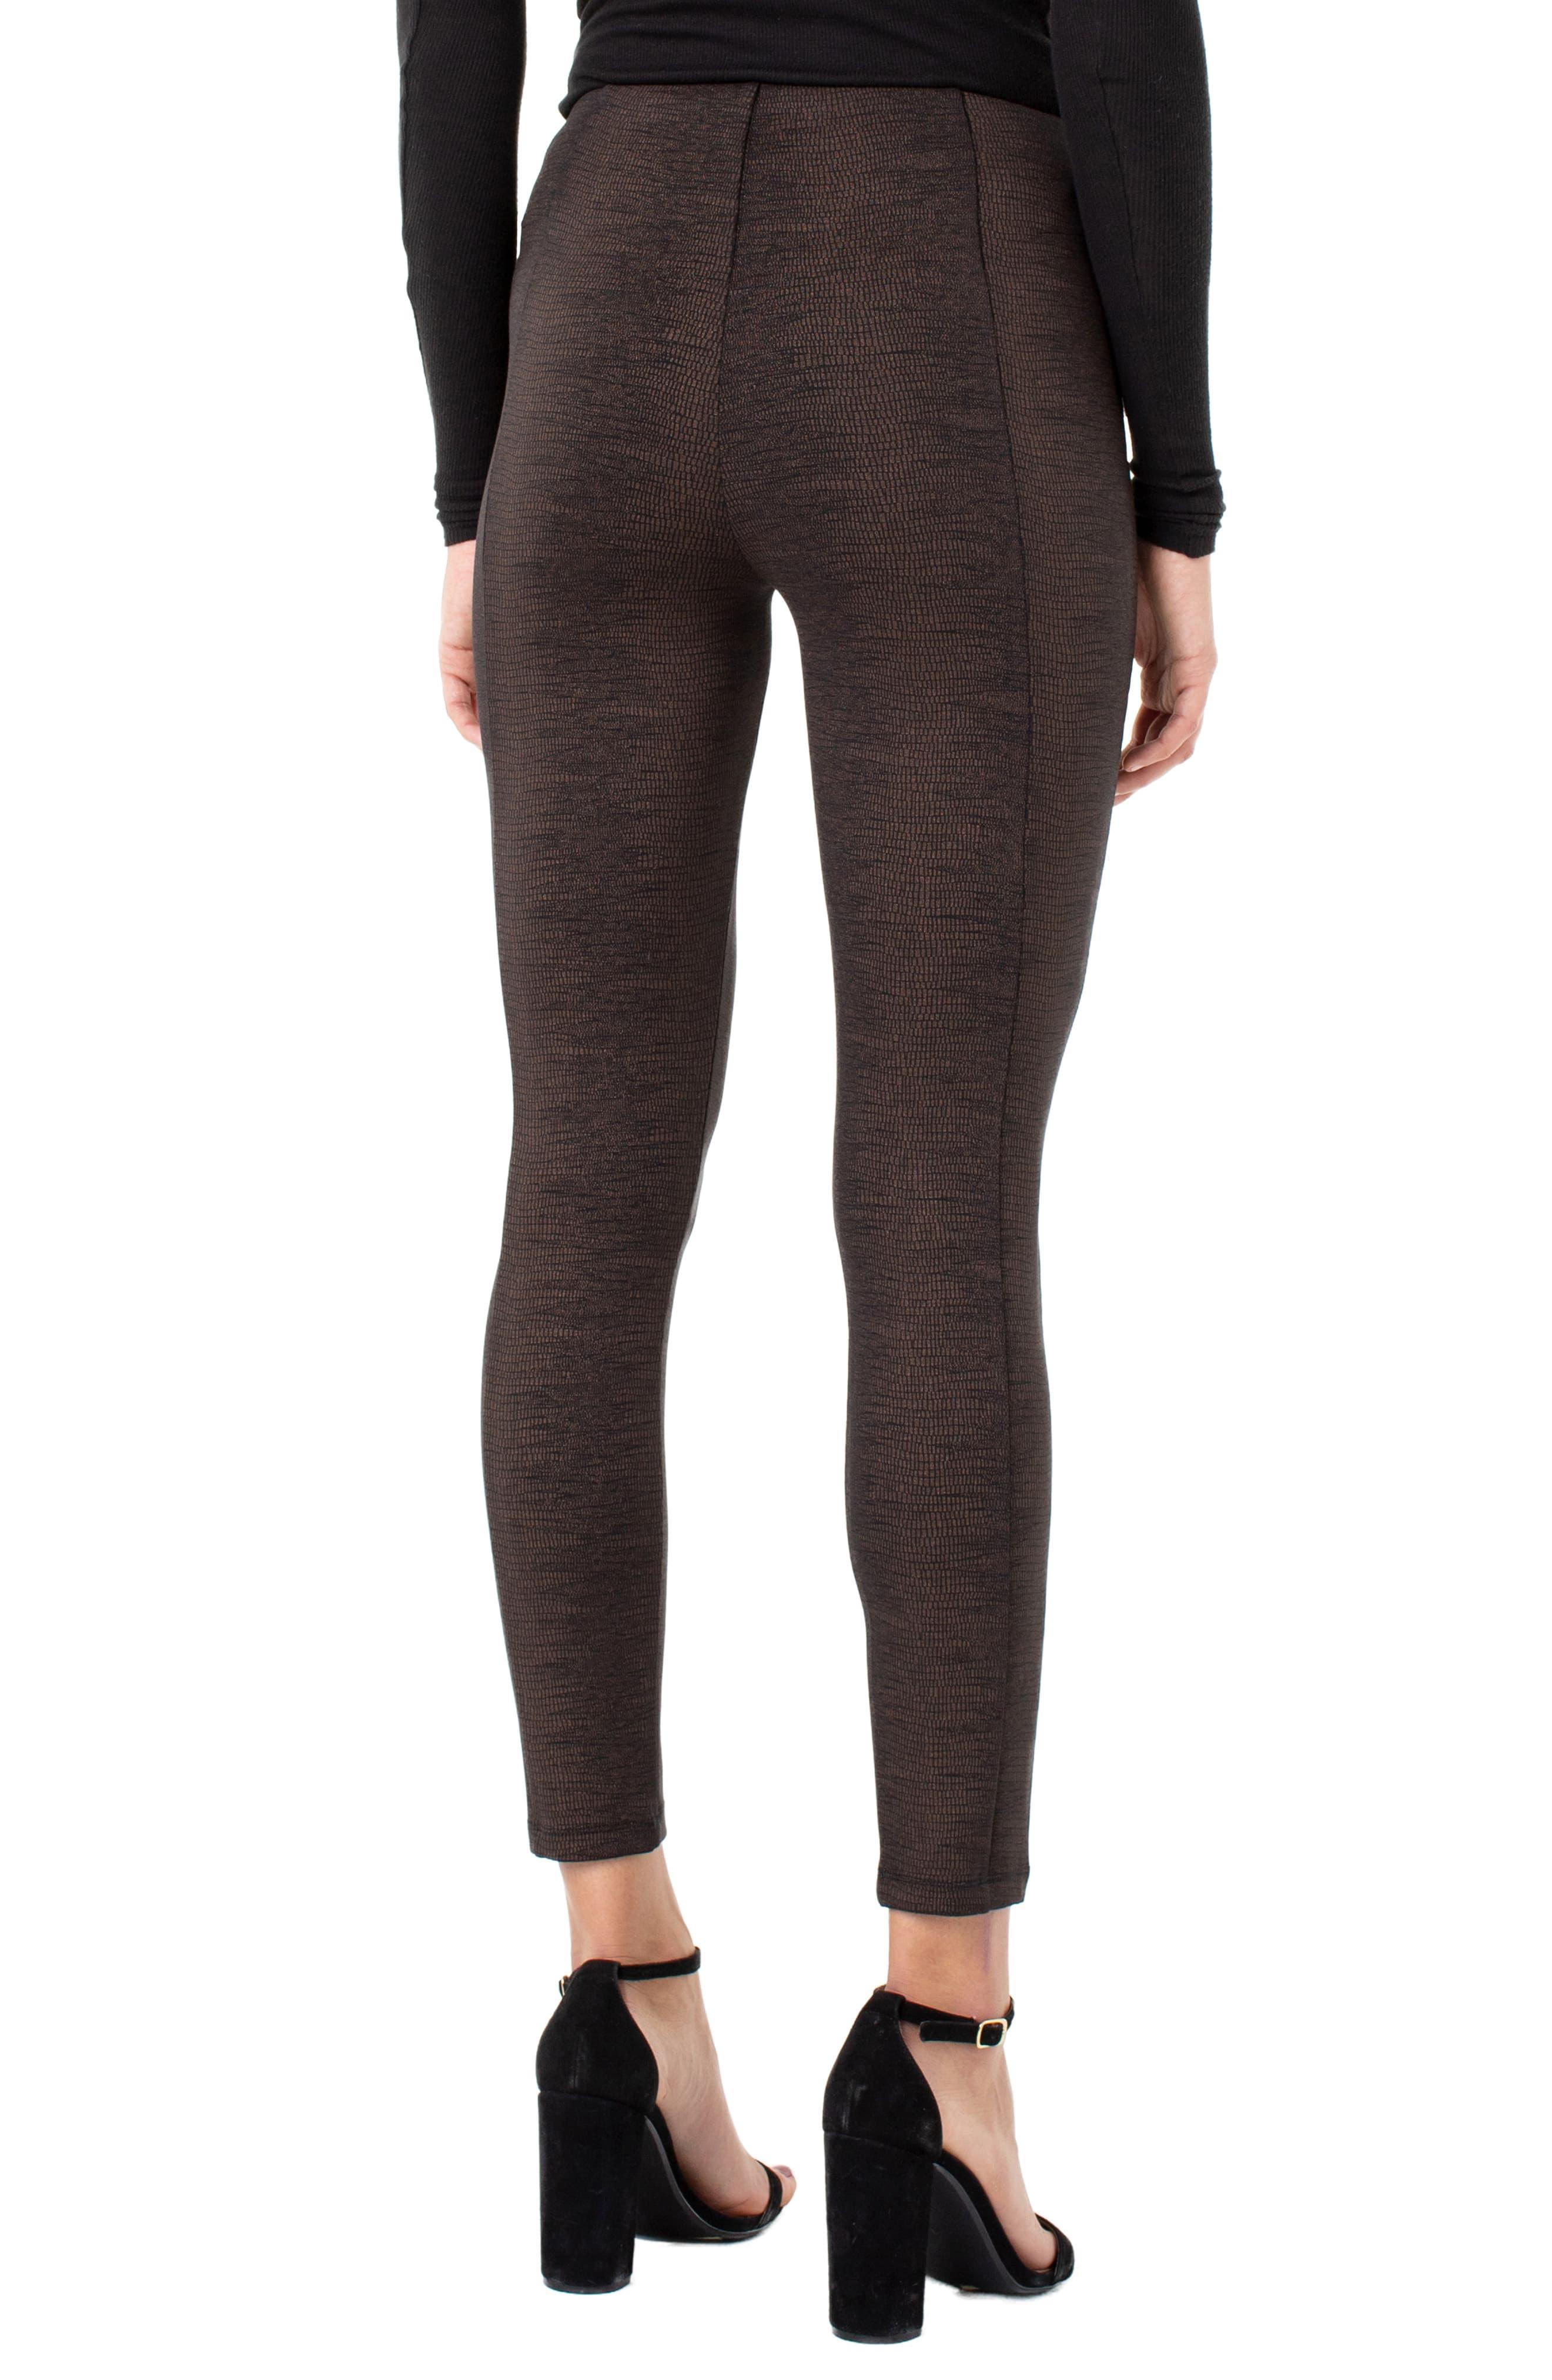 Liverpool Jeans Company Reese Pull-on Leggings in Copper/ Black (Black ...